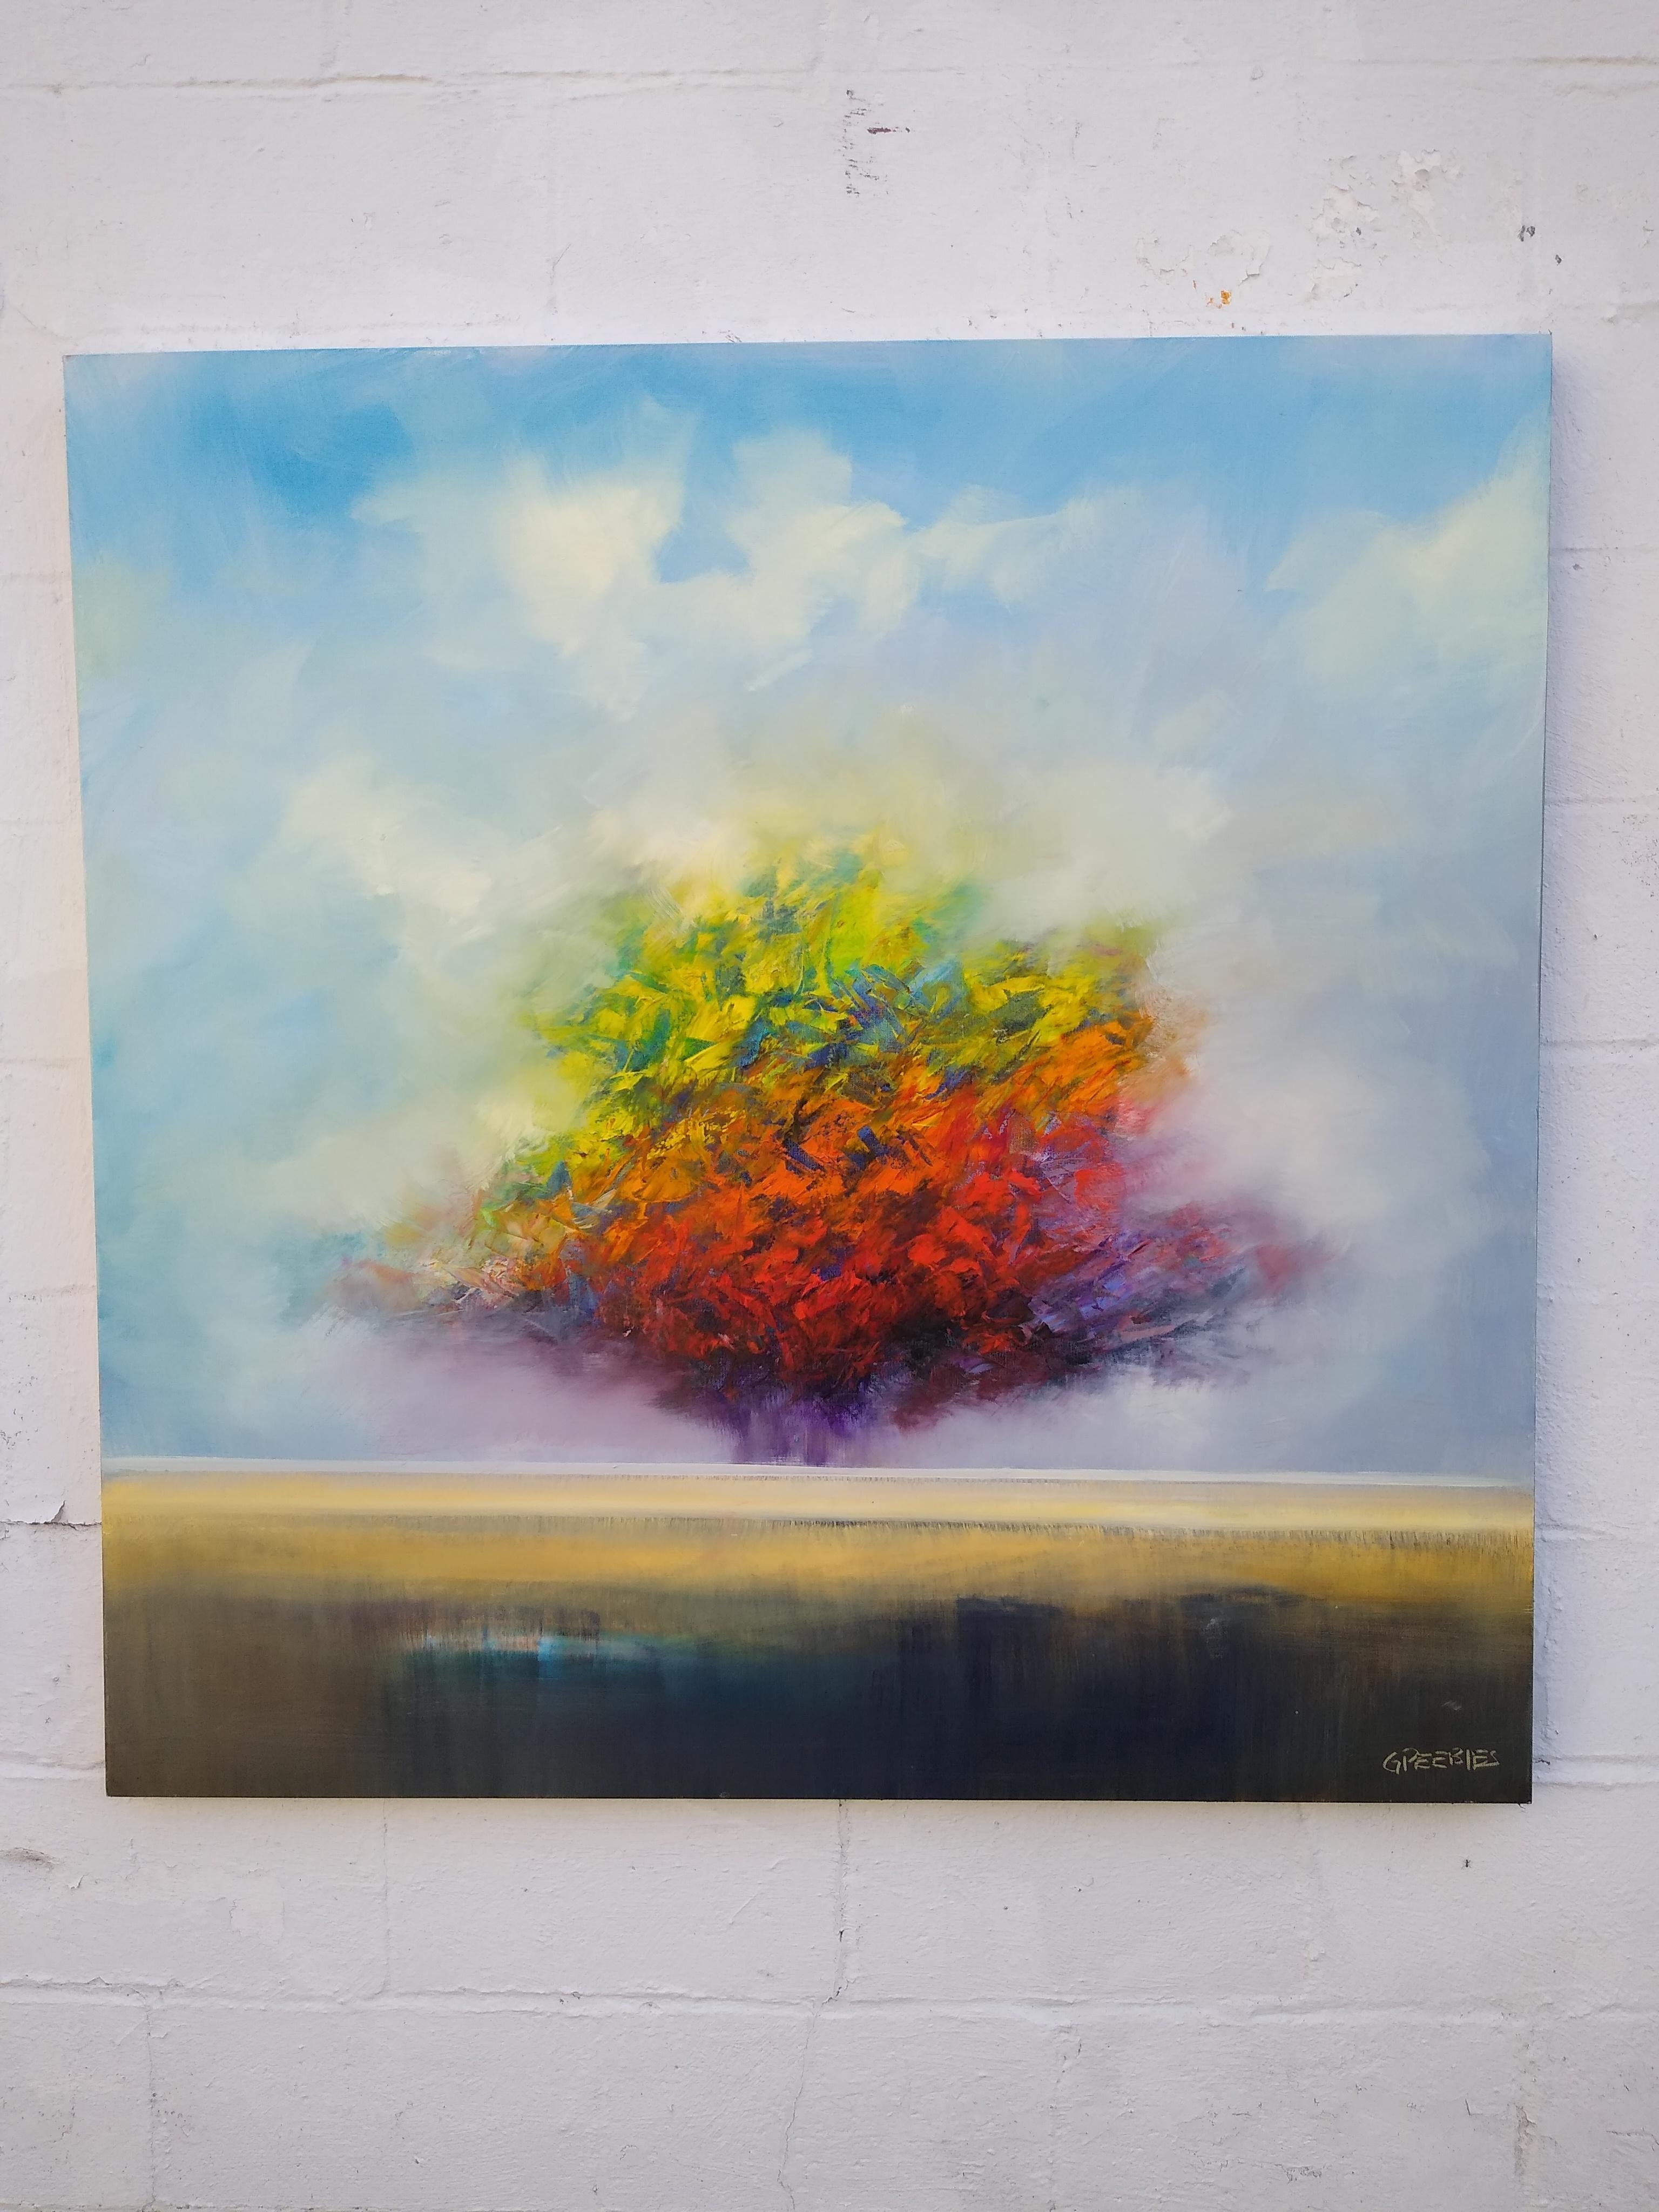 <p>Artist Comments<br />The haze shifts and a vision of a rich and vibrant tree appears. A soft glow surrounds it, filling the atmosphere with its magical presence. Known for his dramatic fall landscapes and panoramic ocean vistas, artist George